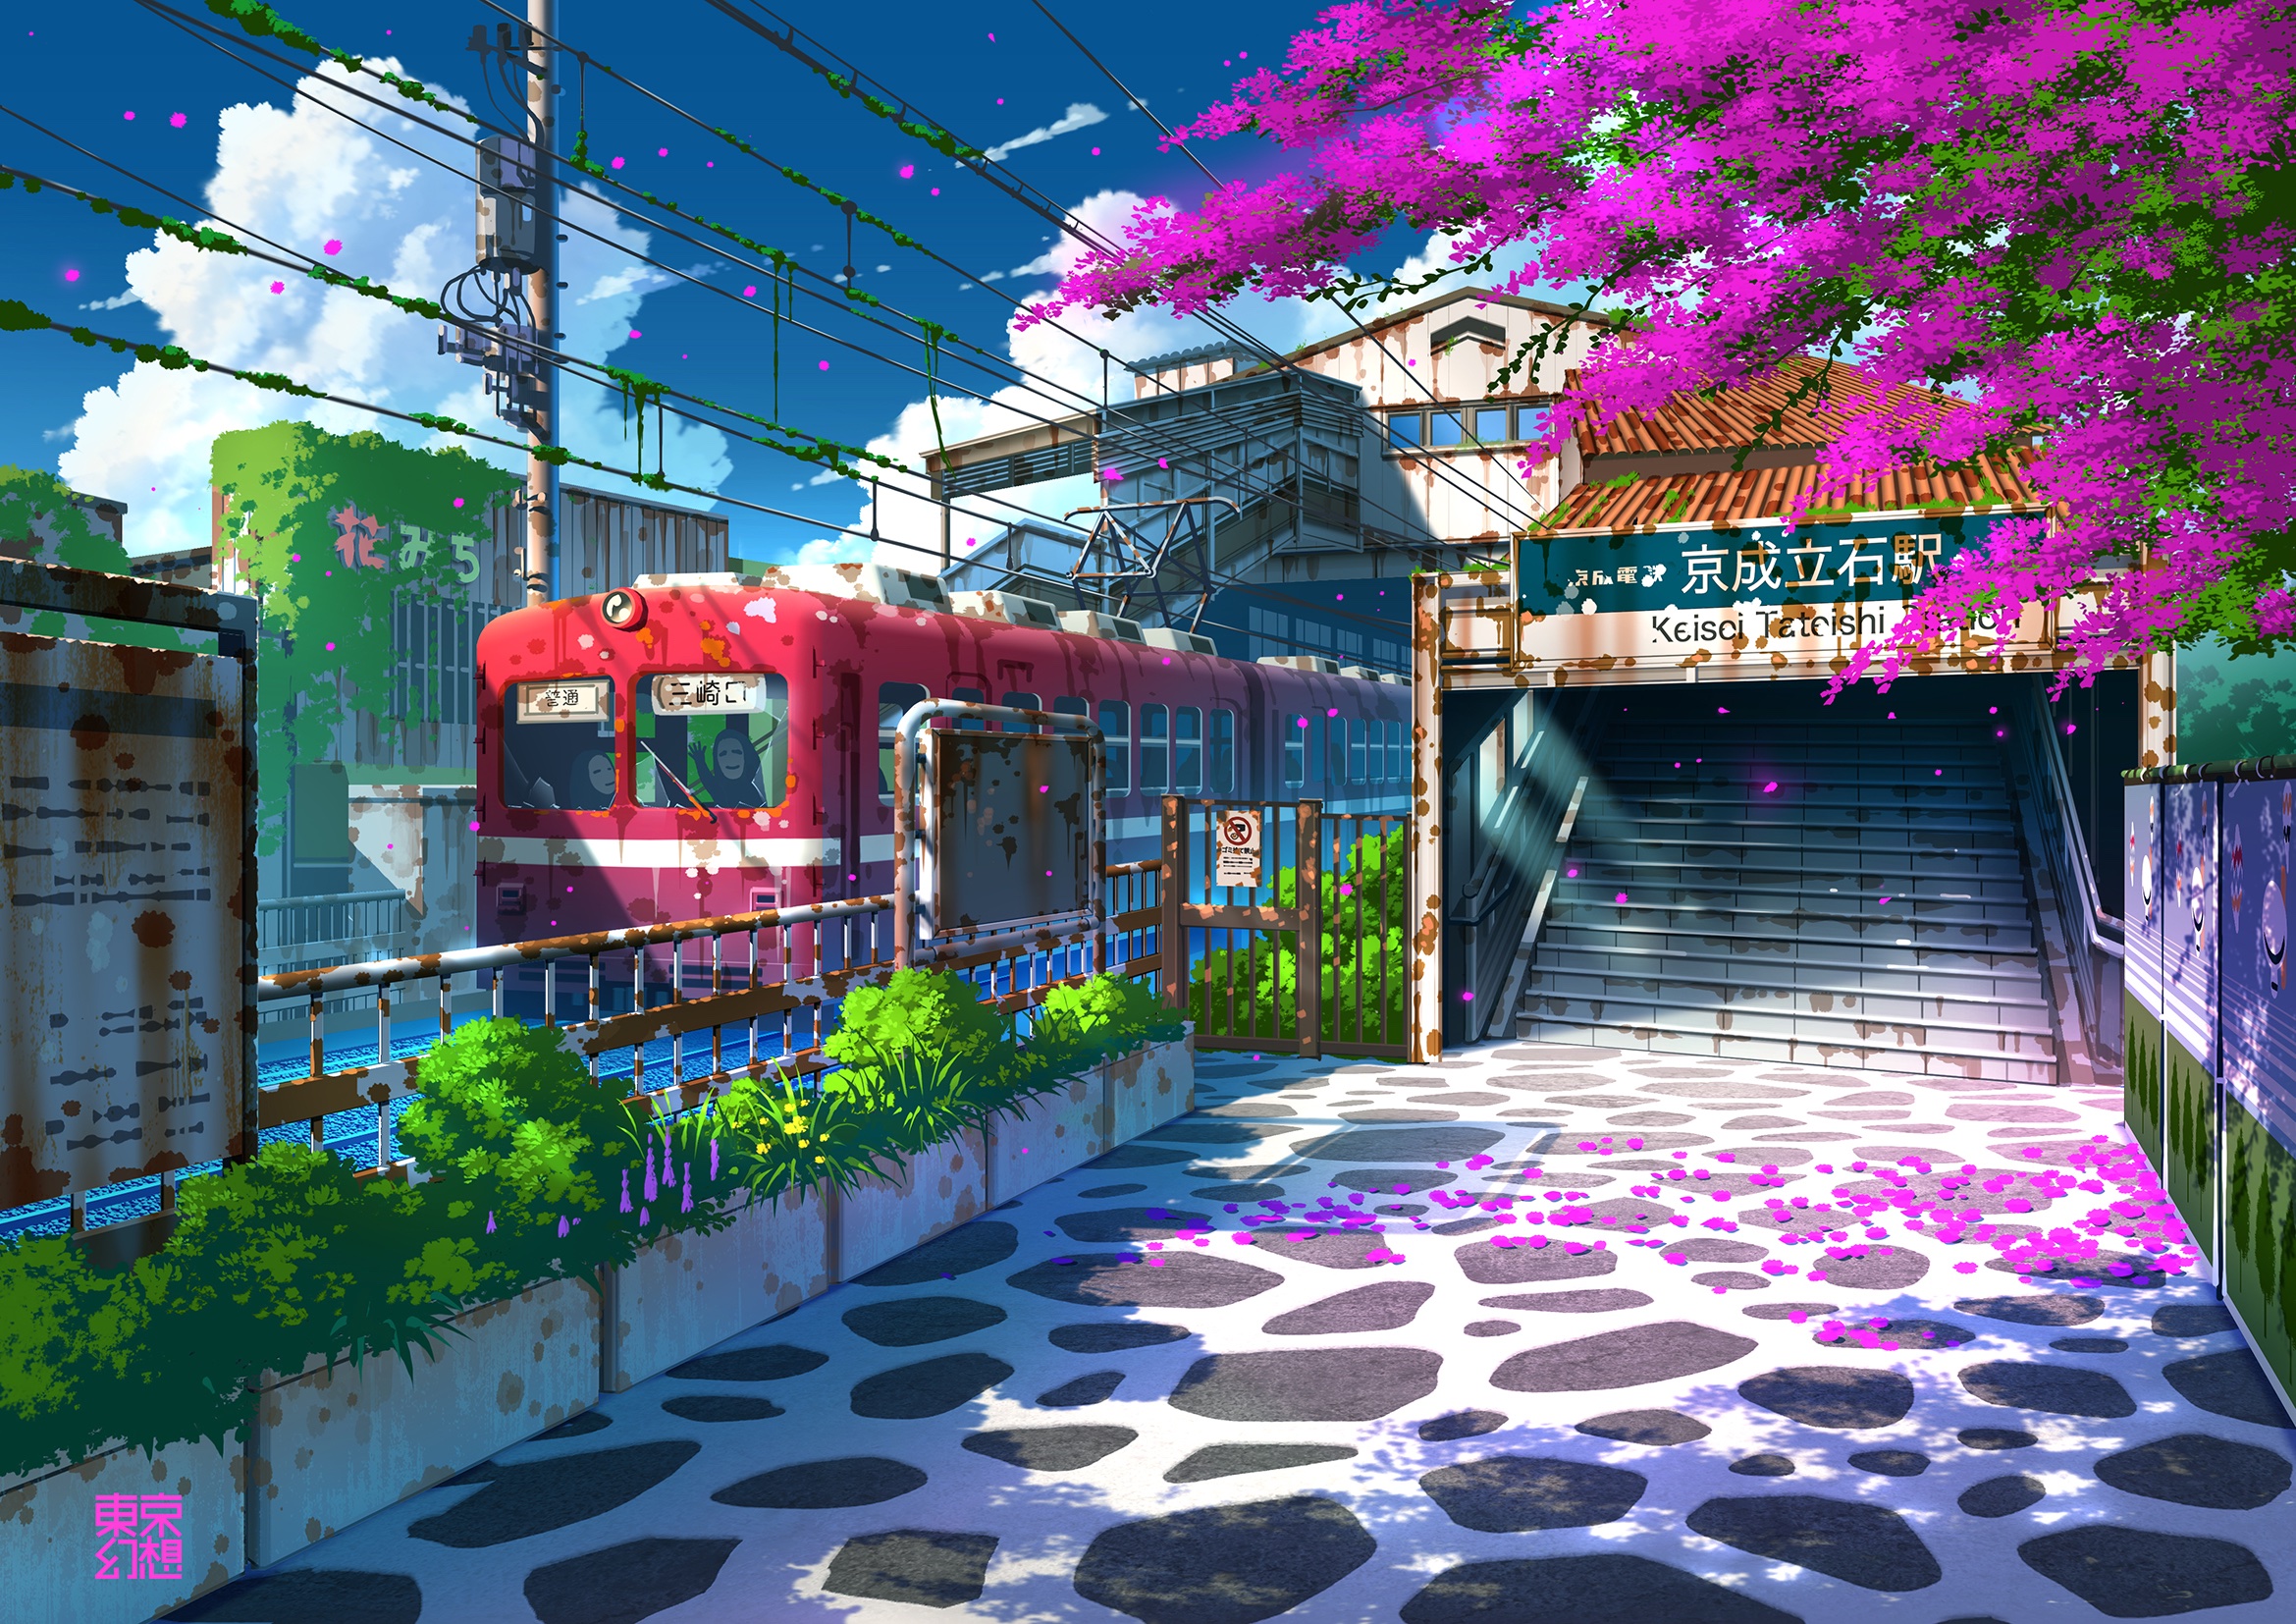 Anime 2339x1654 digital art artwork illustration environment train station train clouds plants colorful trees petals sky stairs